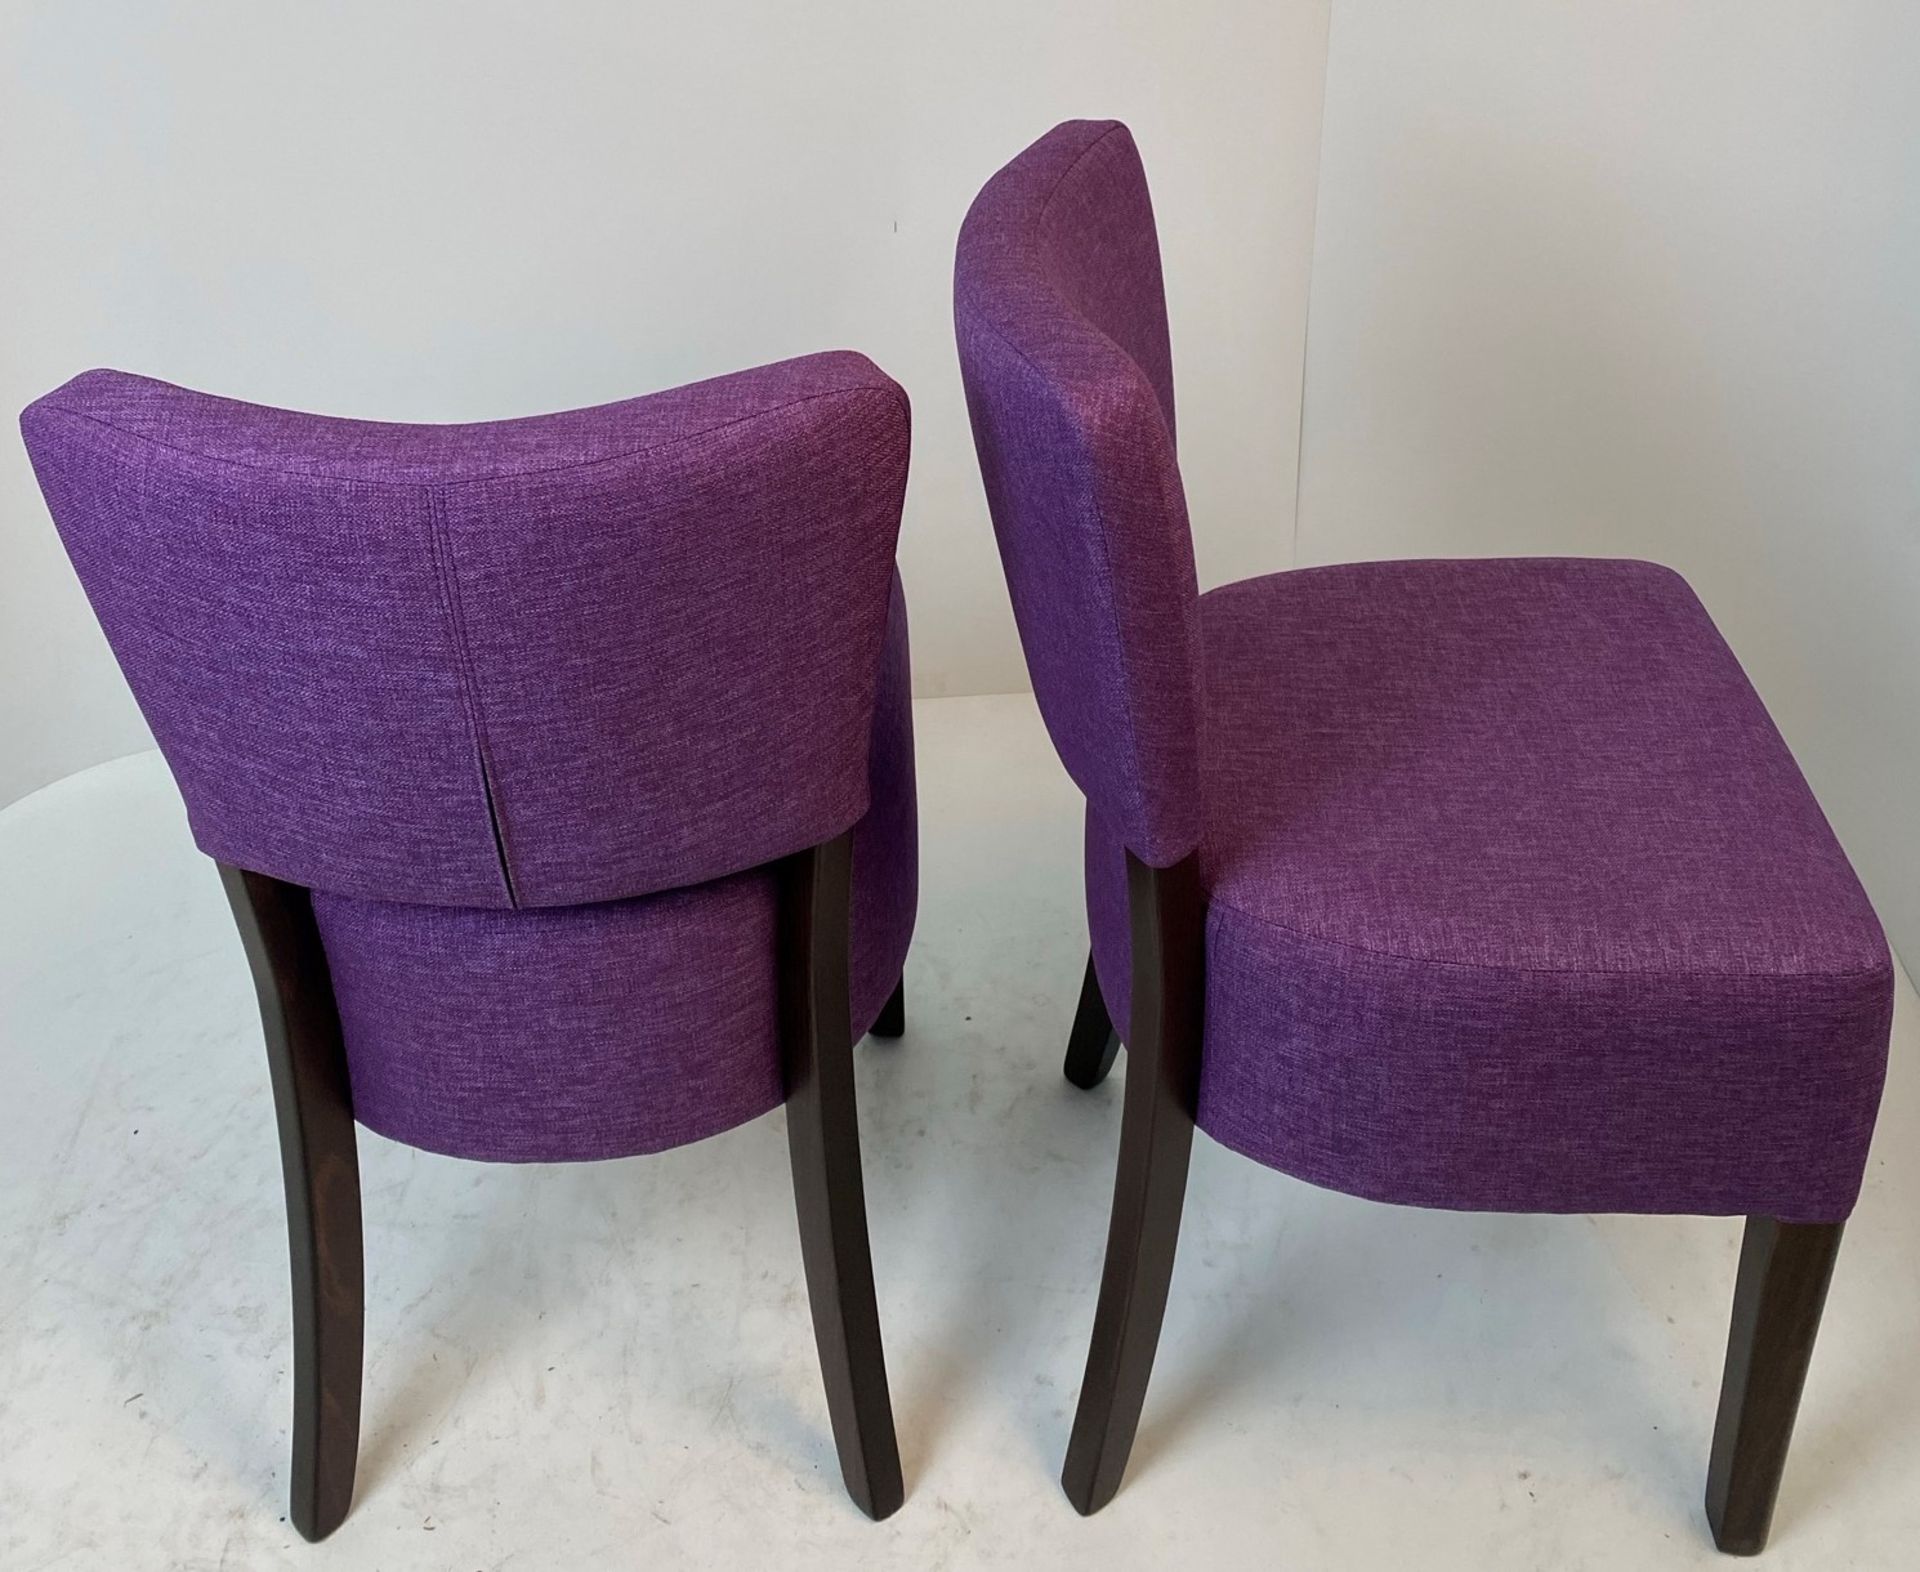 2 x Memphis Panaz Highland 412 Purple side/dining chairs with walnut coloured frames - Image 2 of 3